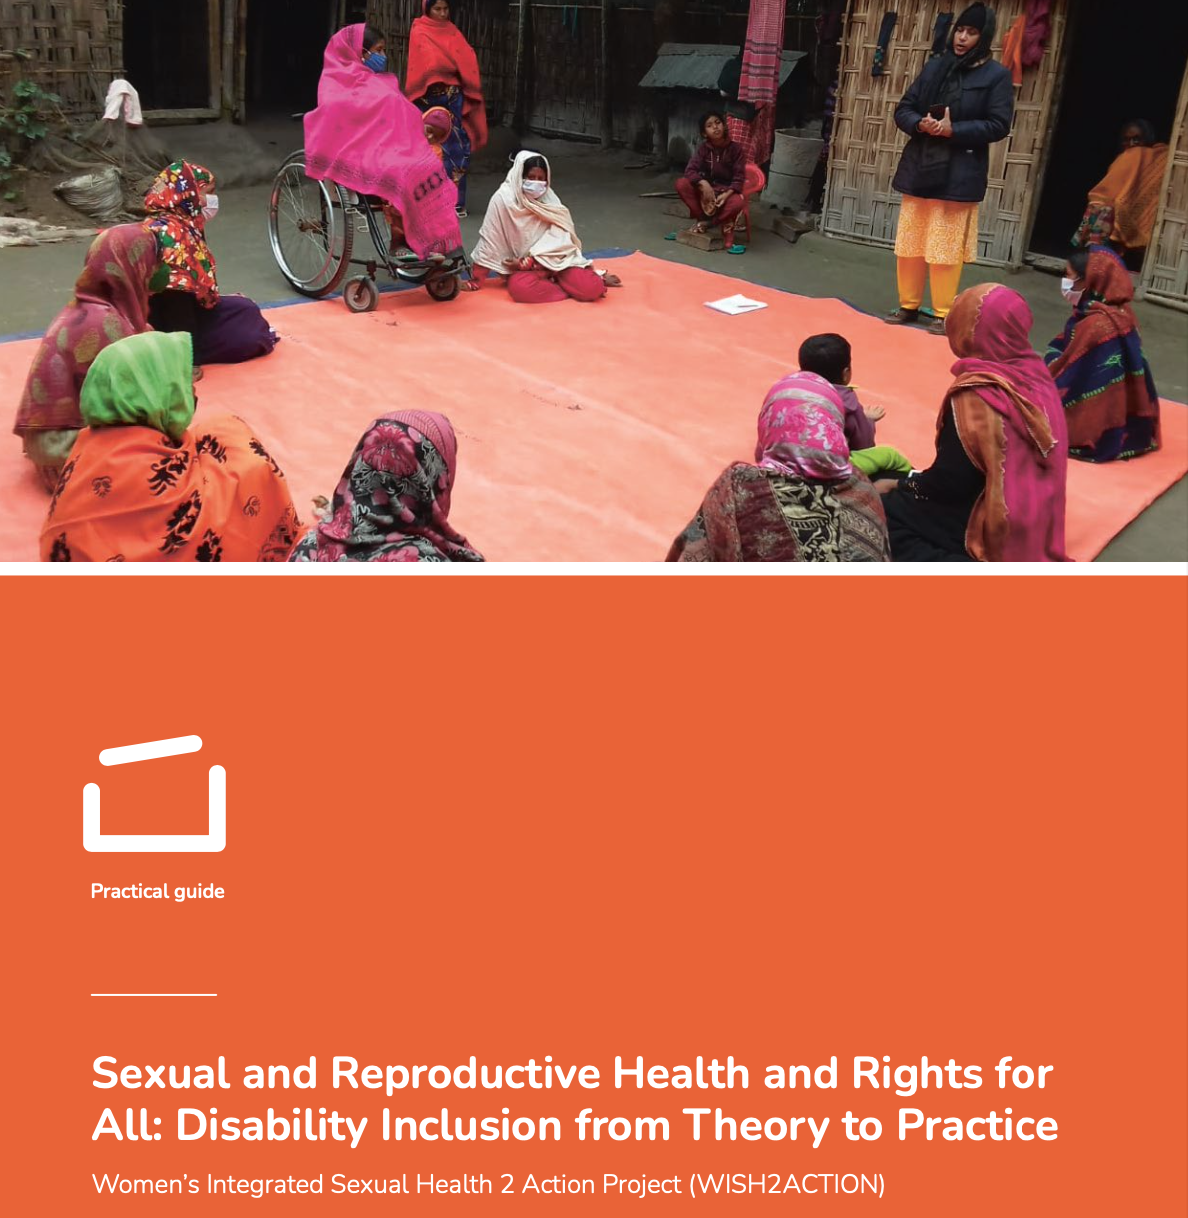 Sexual and Reproductive Health and Rights for All: Disability Inclusion from Theory to Practice